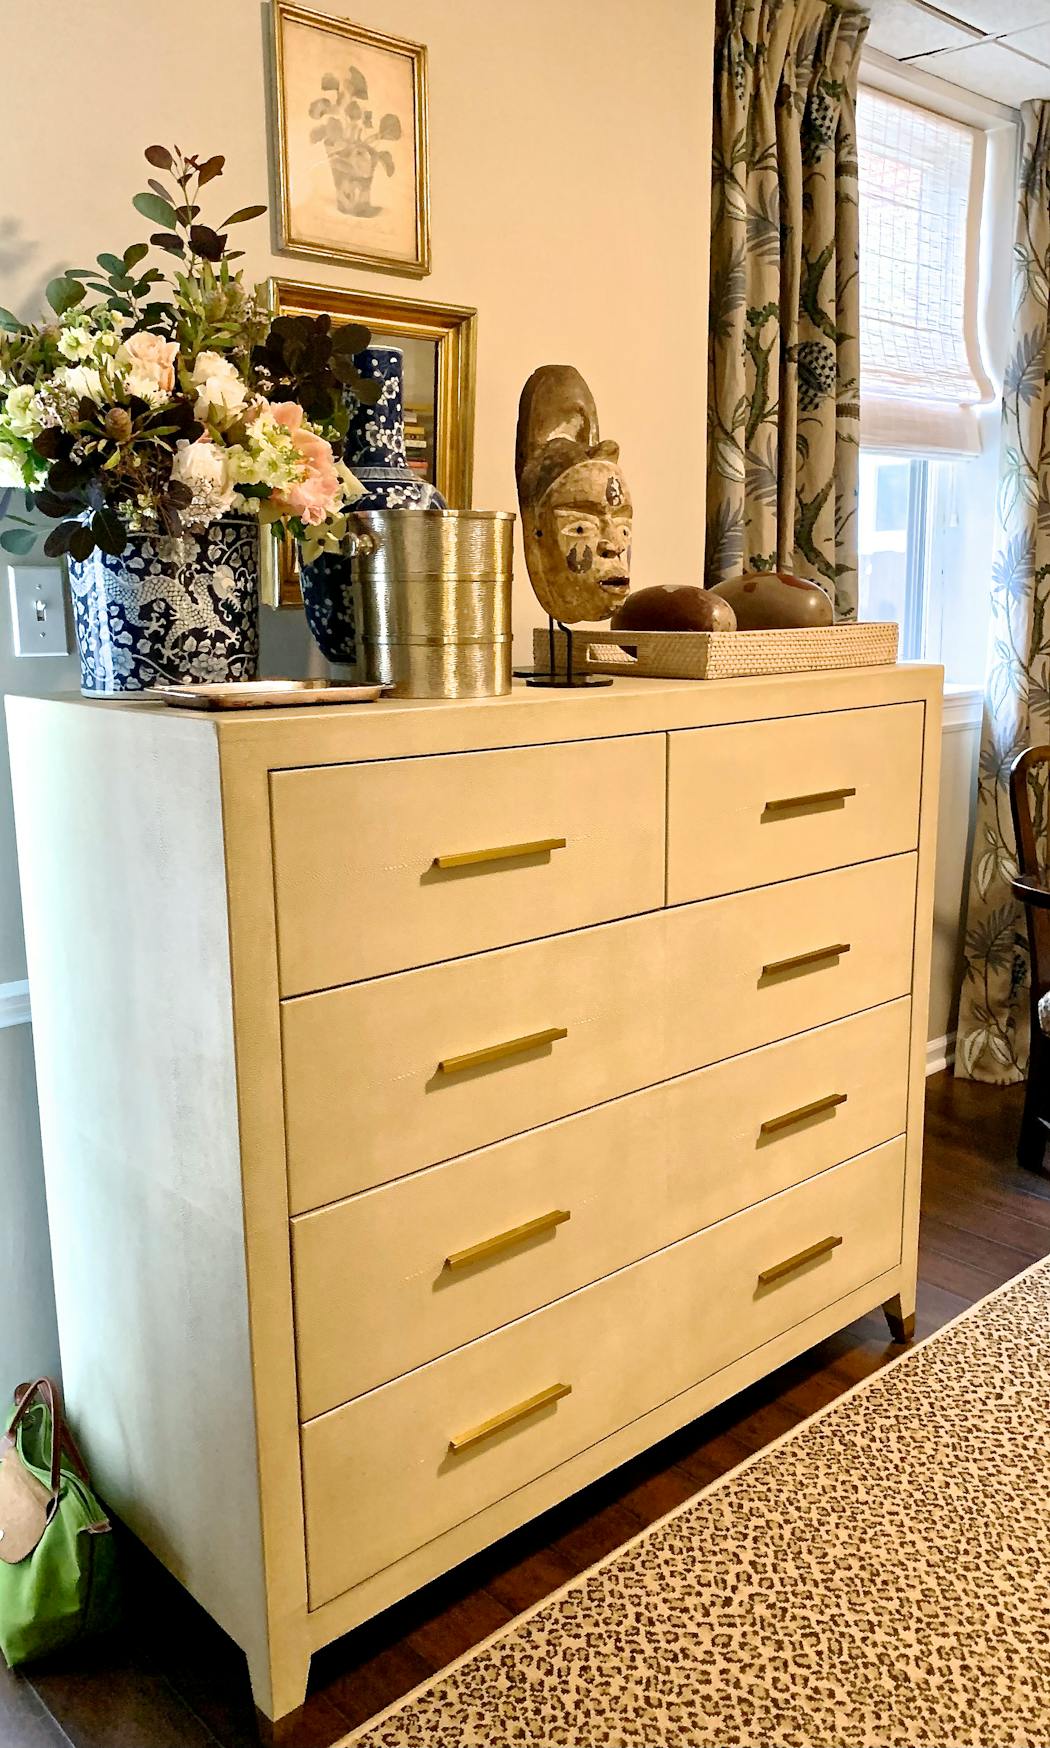 The Shagreen chest in designer Jim Miller’s apartment holds his African masks, river rocks from India and a floral arrangement by Anne Dickson owner of Fox and the Fluer. 